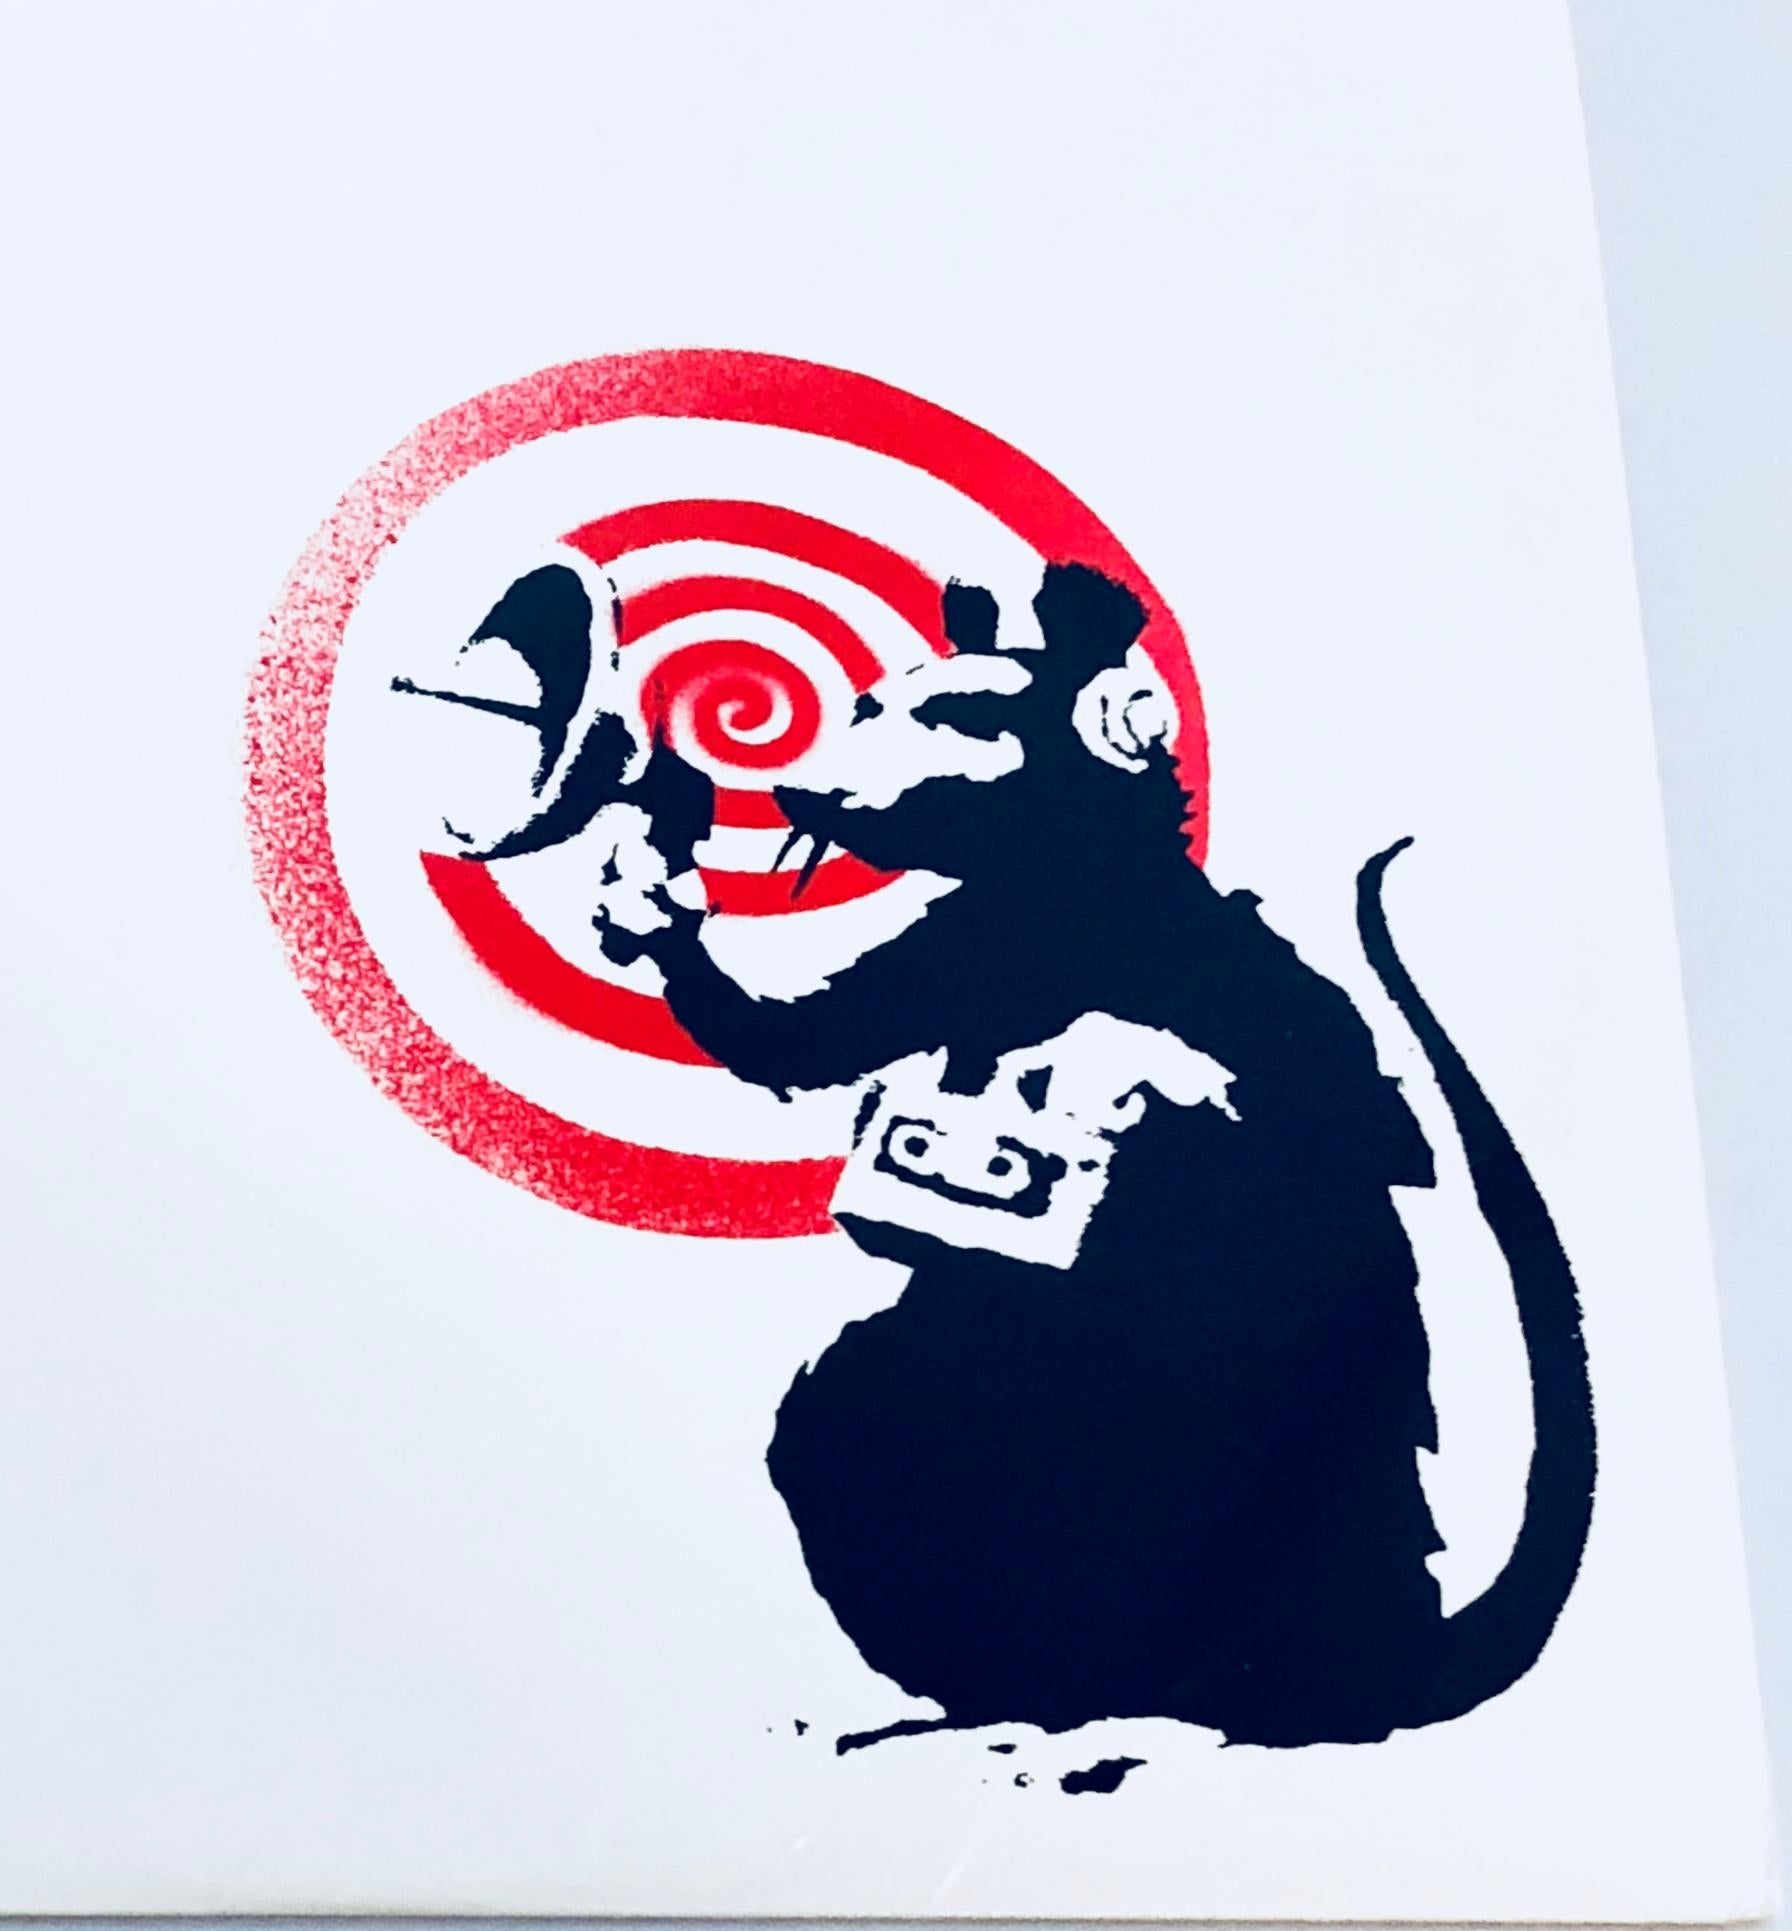 Banksy produced this cover & record label art for his friends Dirty Funker in 2008. Featured here is Banksy's world renown Radar Rat. A rare sought after accessibly priced Banksy collectible that makes for very cool wall art. 

Silkscreen on Record